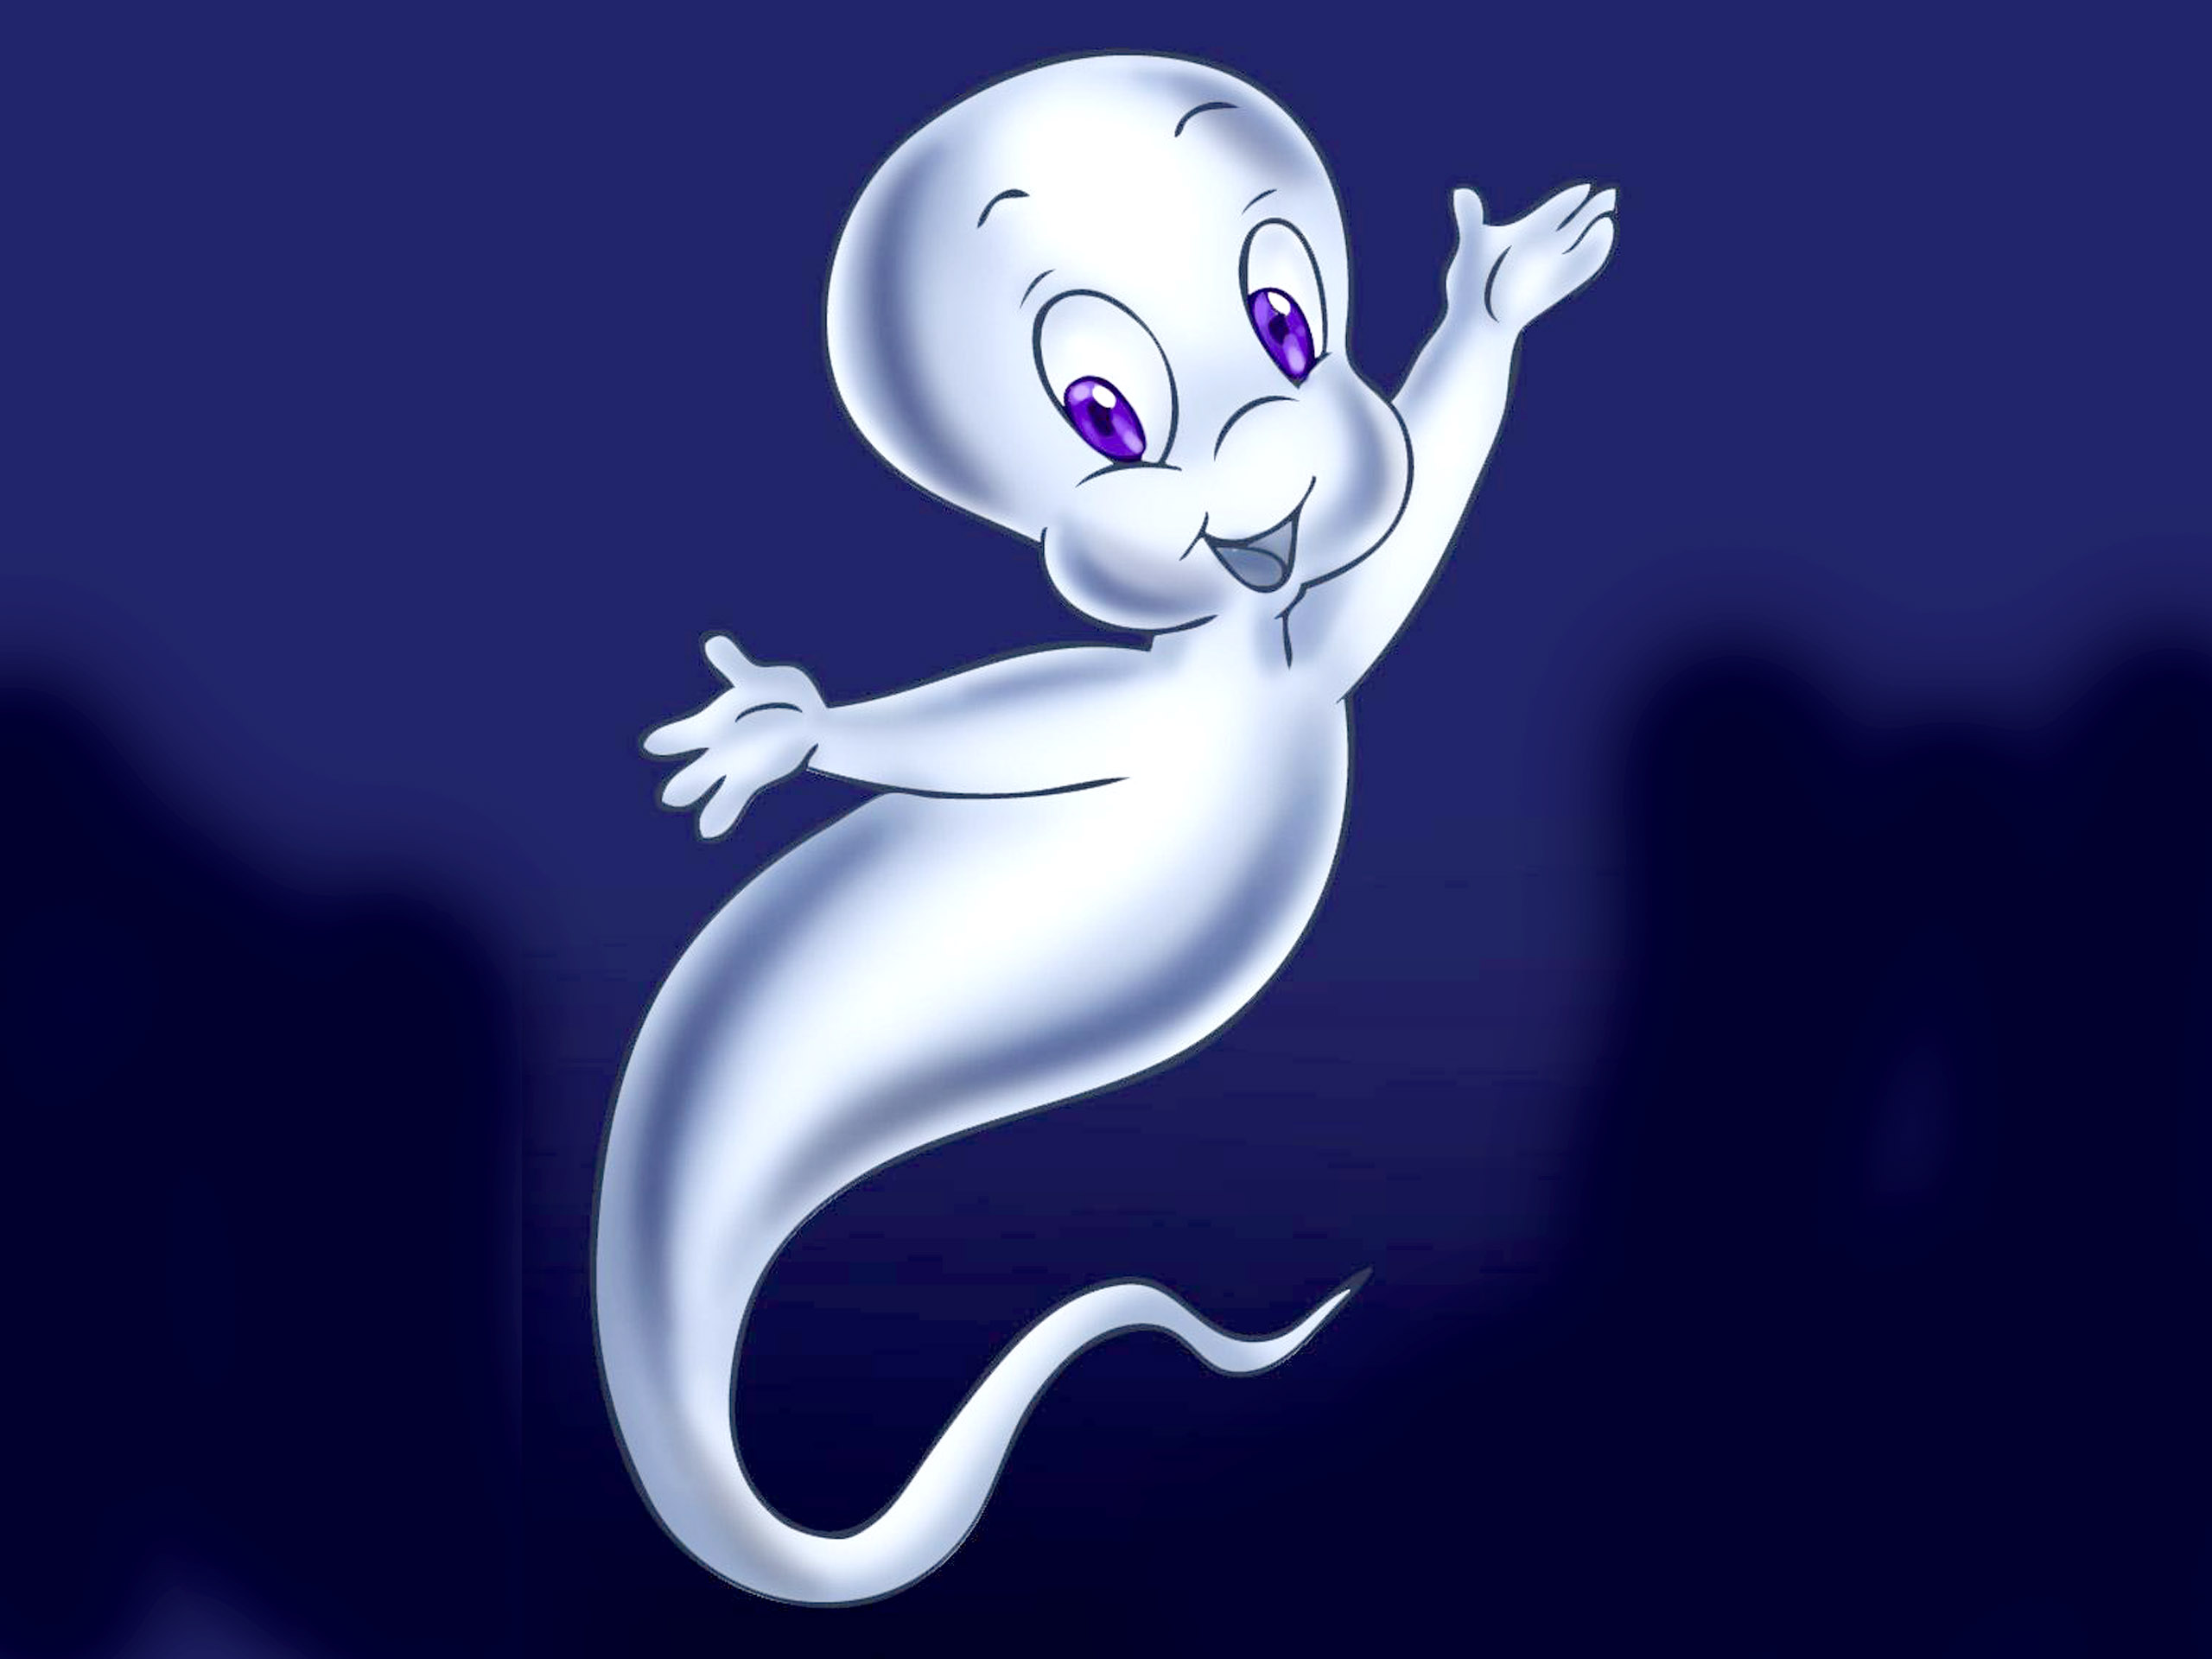 show me a picture of casper the friendly ghost